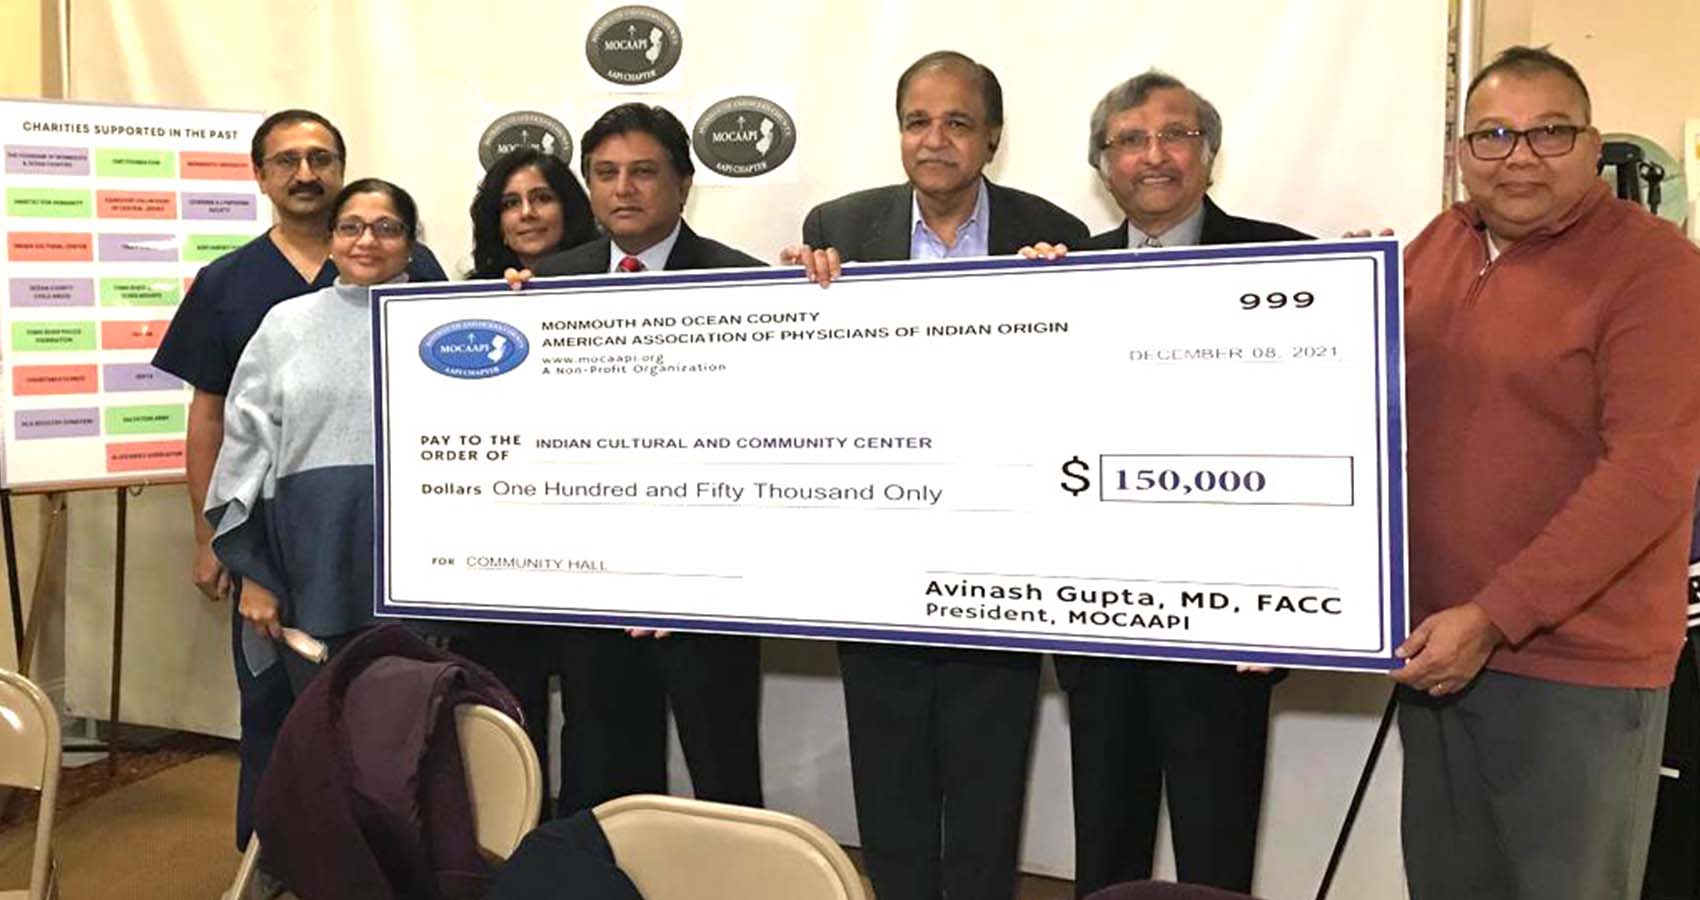 New Jersey Physicians Donate $300,000 To Food Bank, Indian Cultural Center